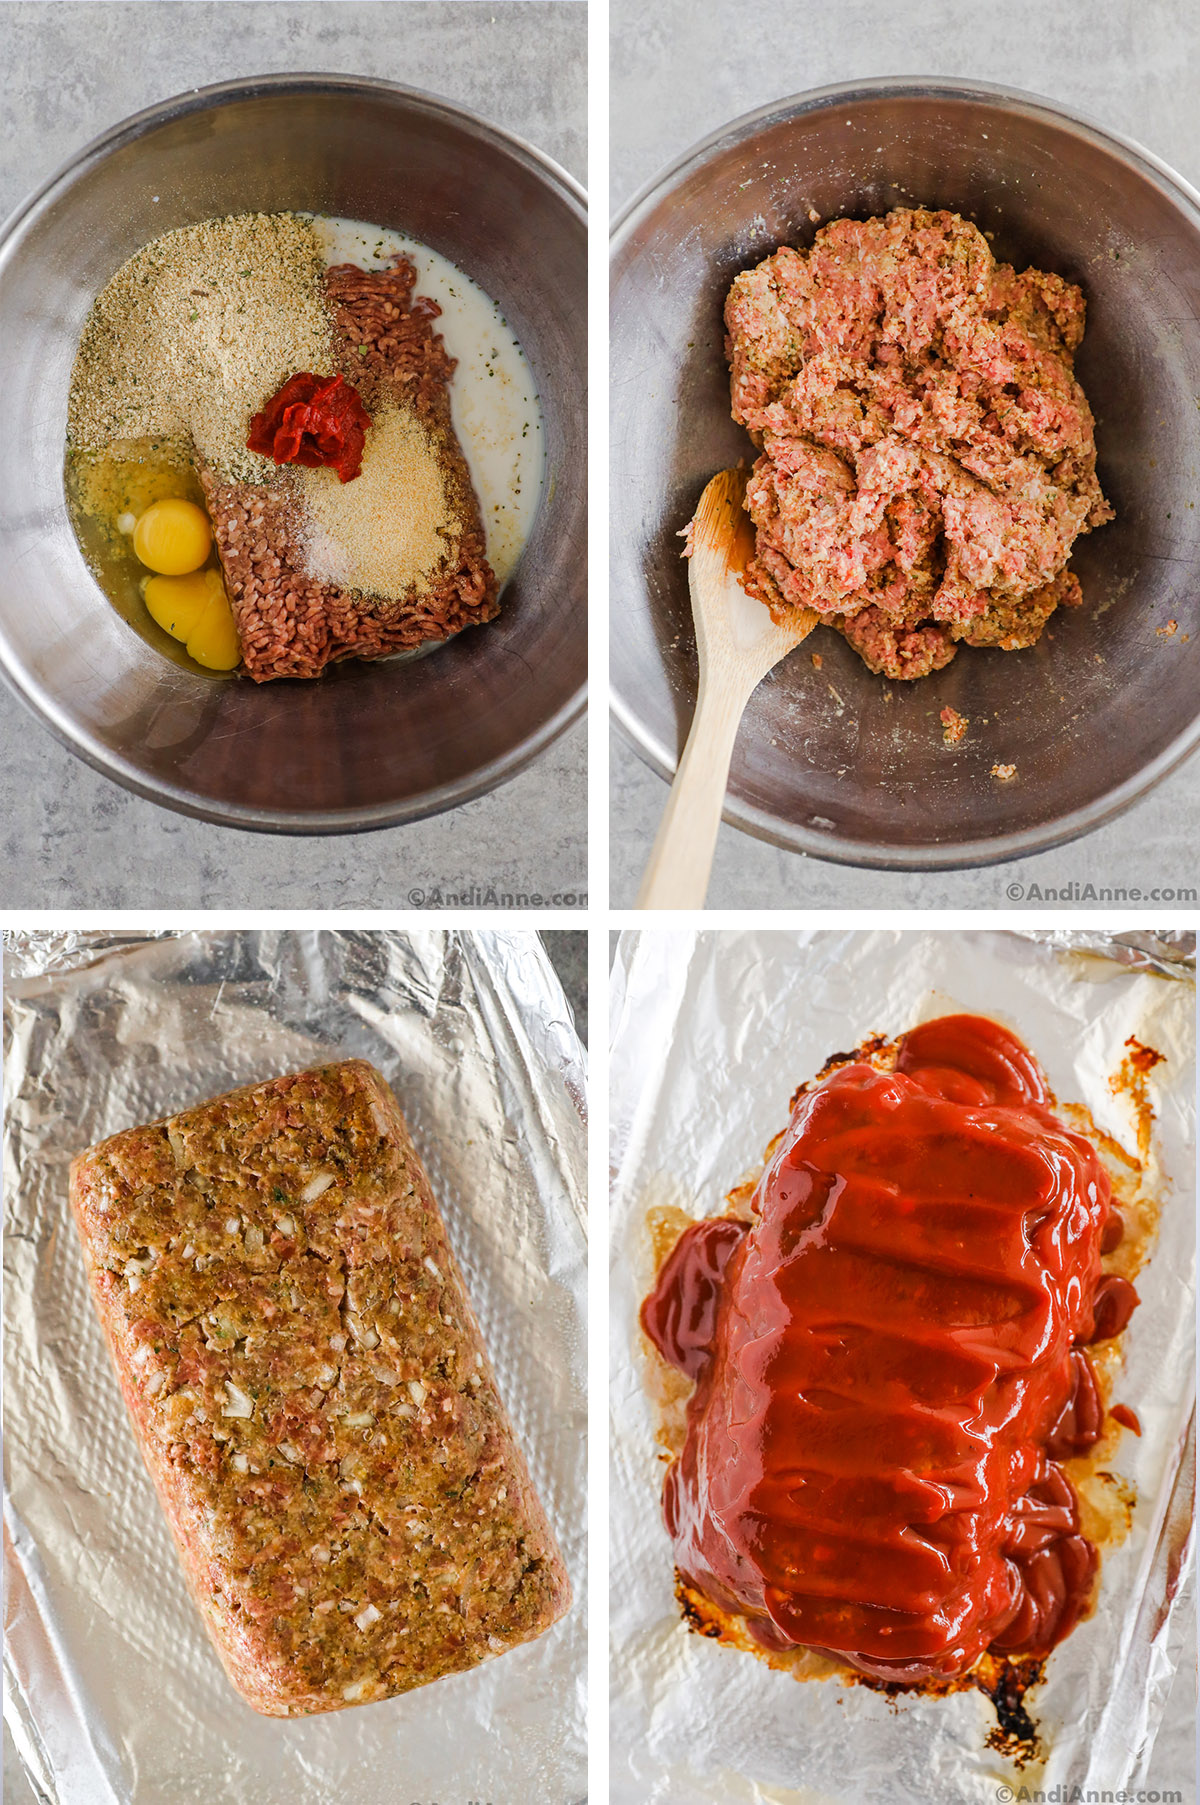 Four images showing steps to make meatloaf. First is various ingredients including raw ground beef dumped in a large steel bowl. Second is ground beef mixture all mixed together. Third is raw meatloaf packed in loaf shape on a baking sheet. Fourth is baked meatloaf smothered with sauce.